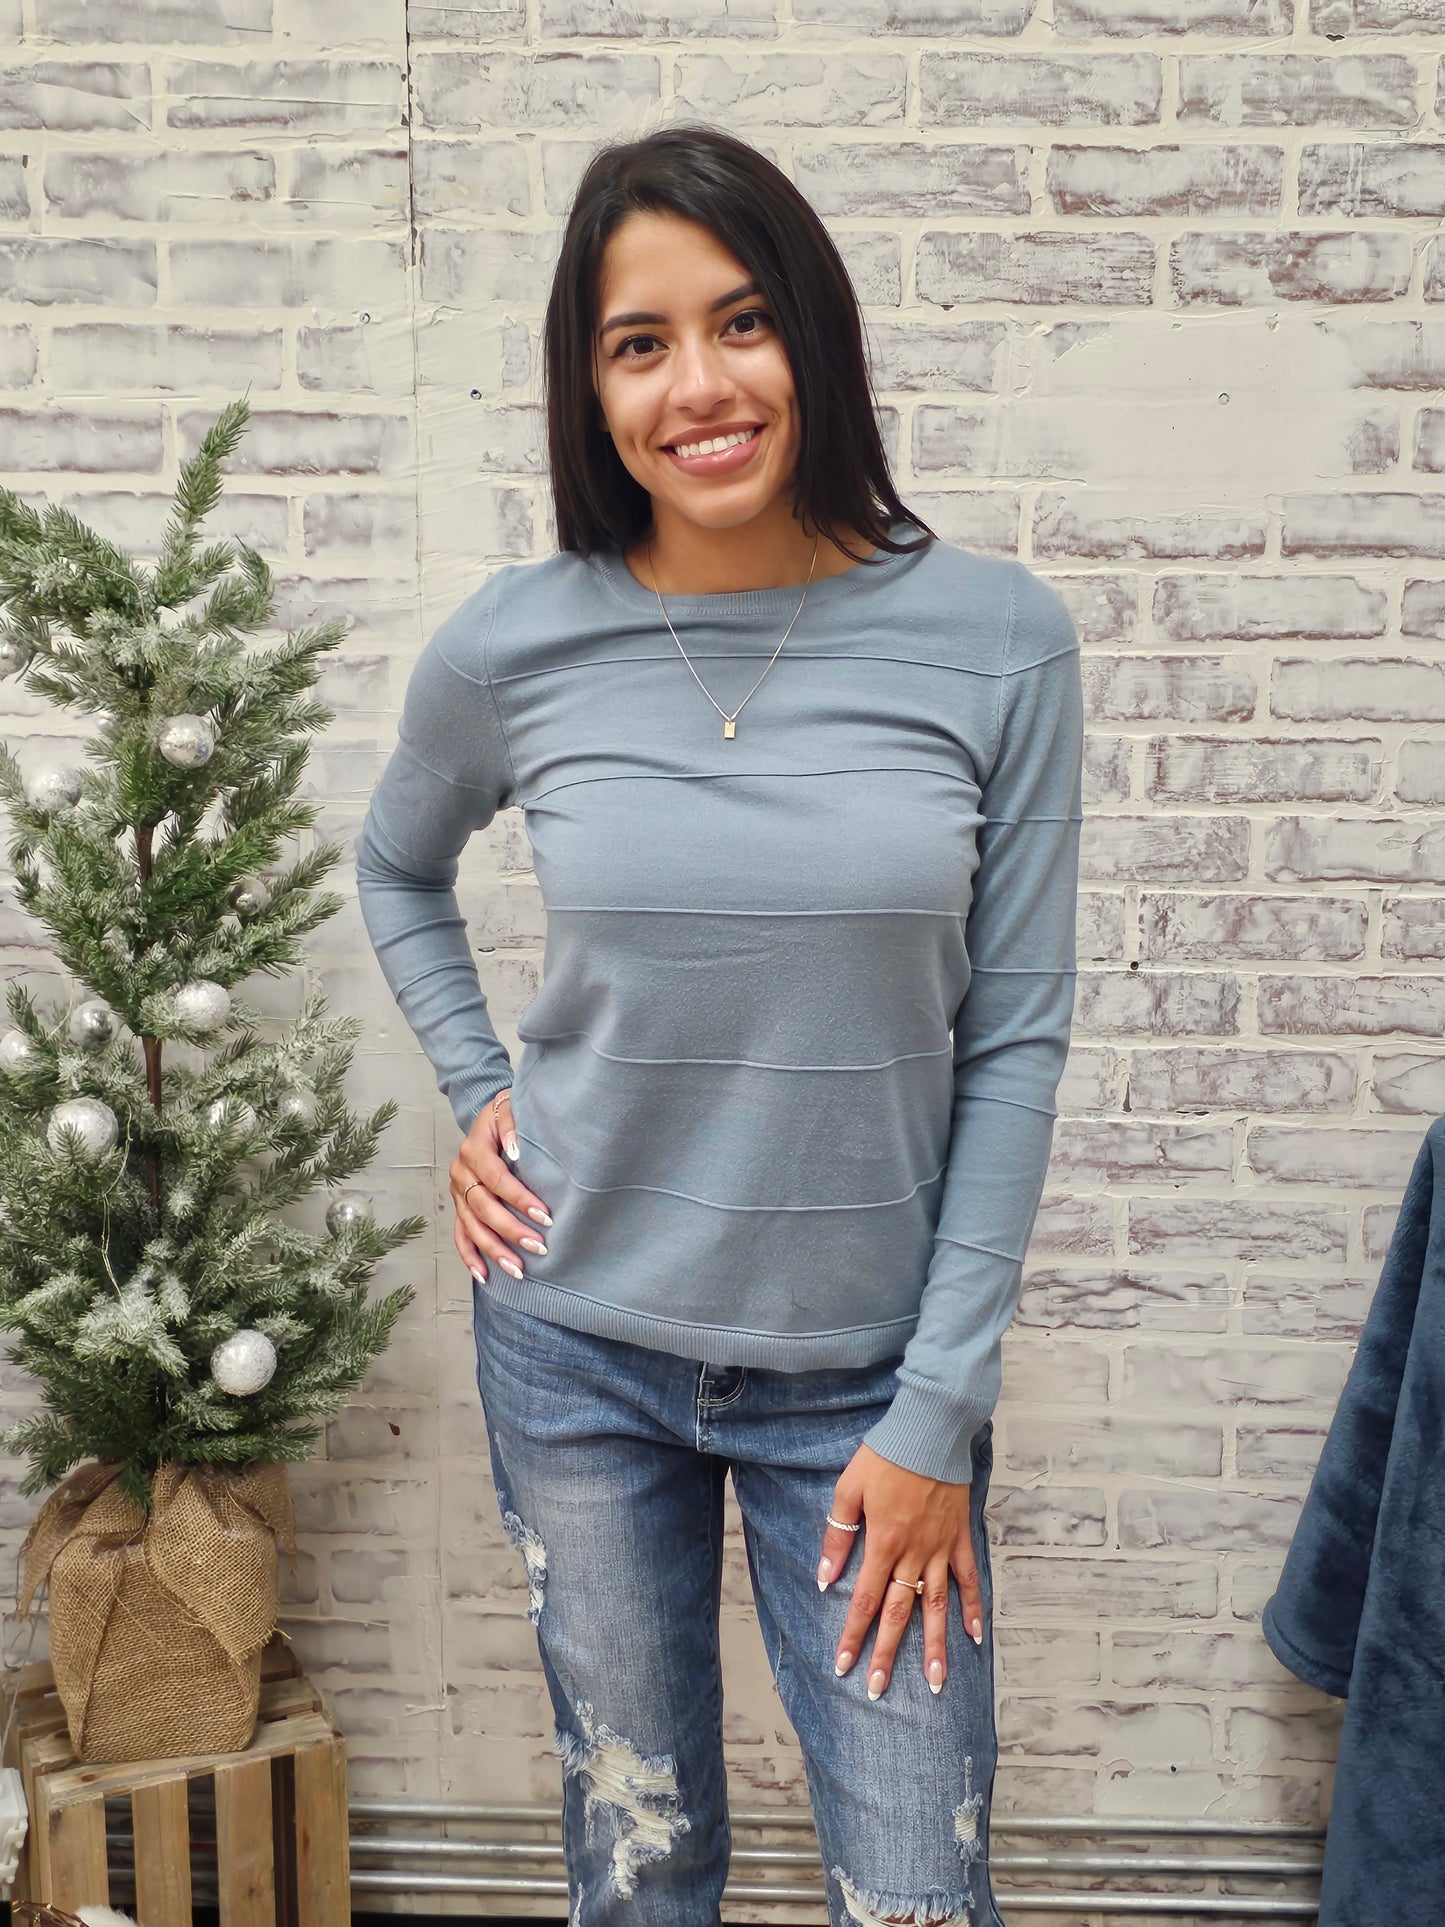 Load image into Gallery viewer, Blue Striped Sweater
